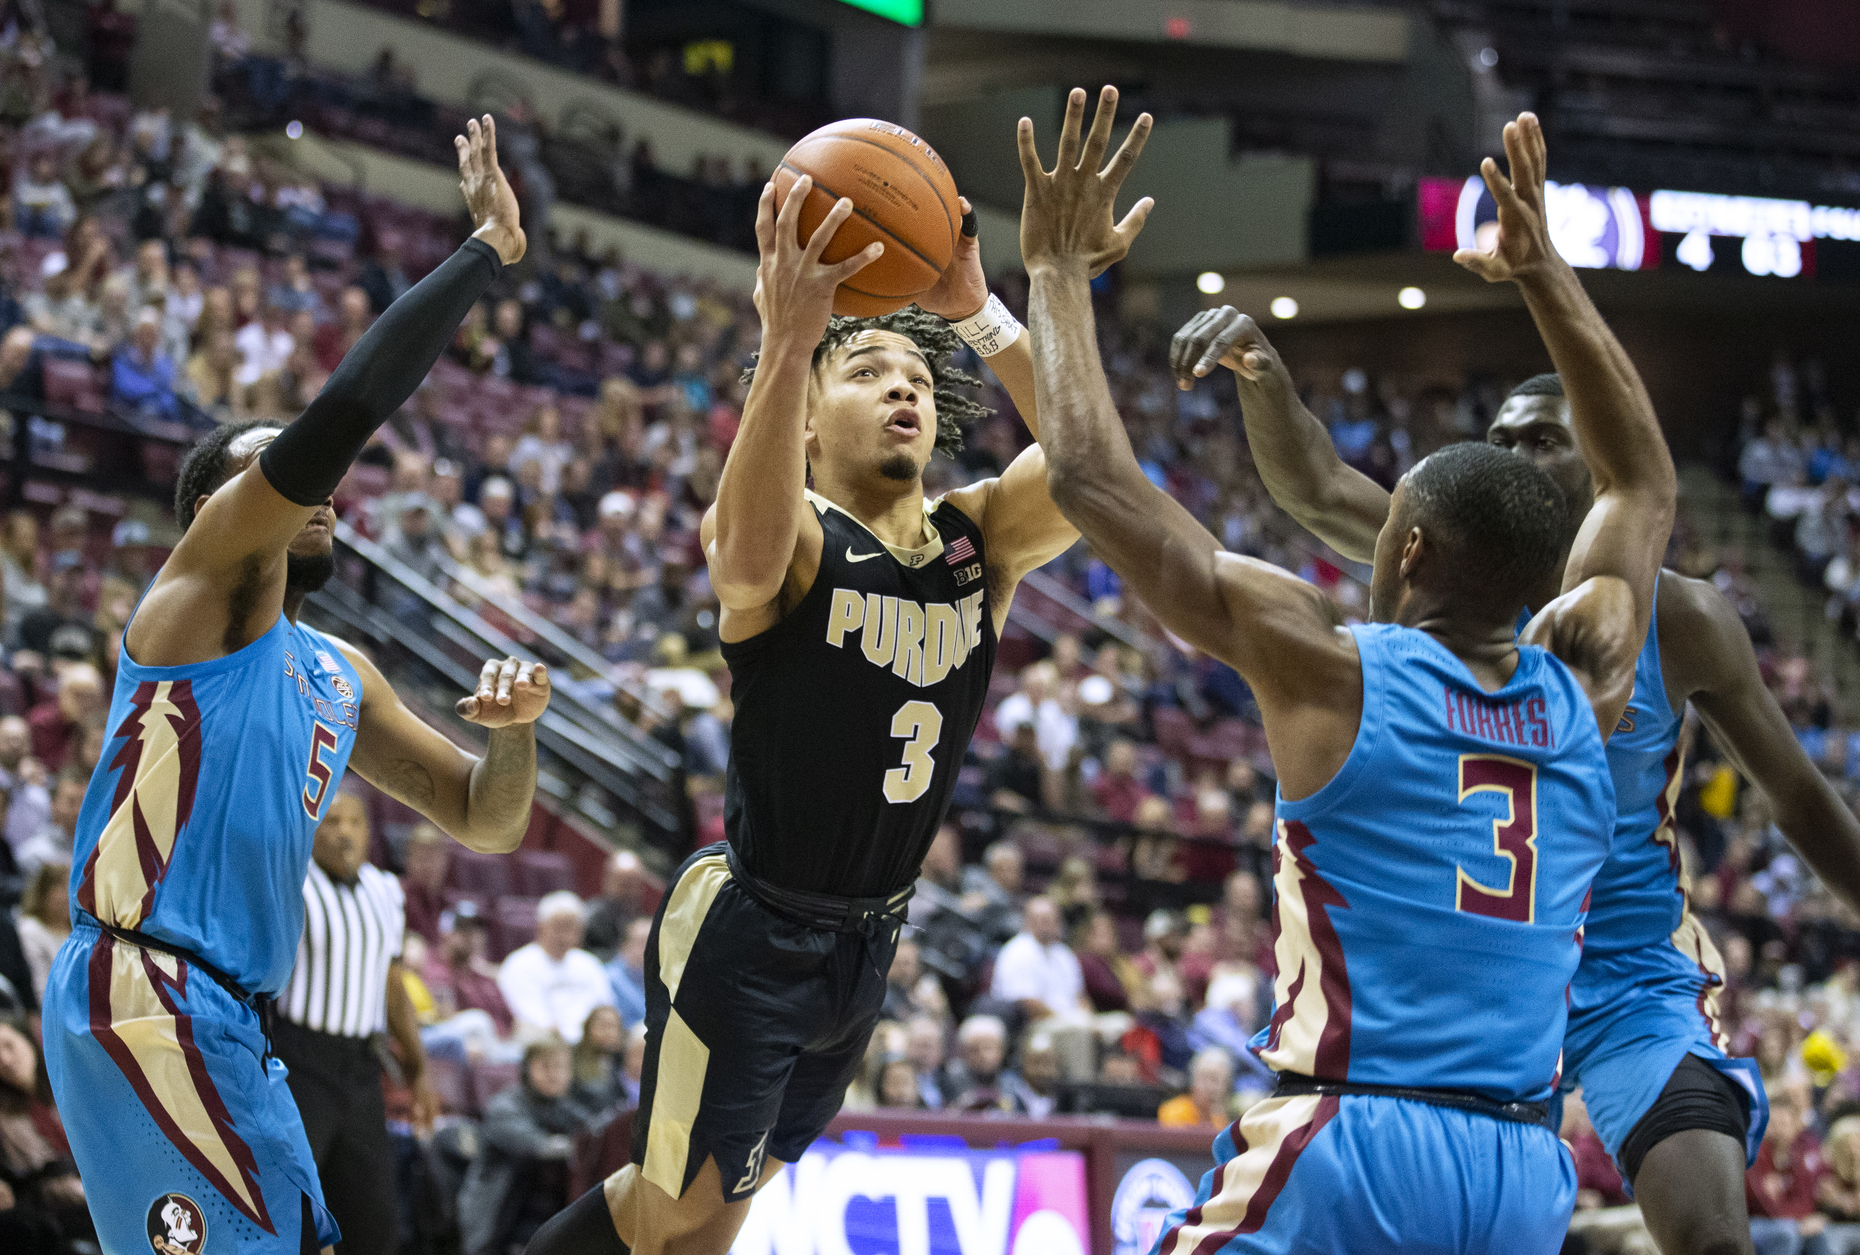 Forrest defense, late bucket lifts Florida St past Purdue